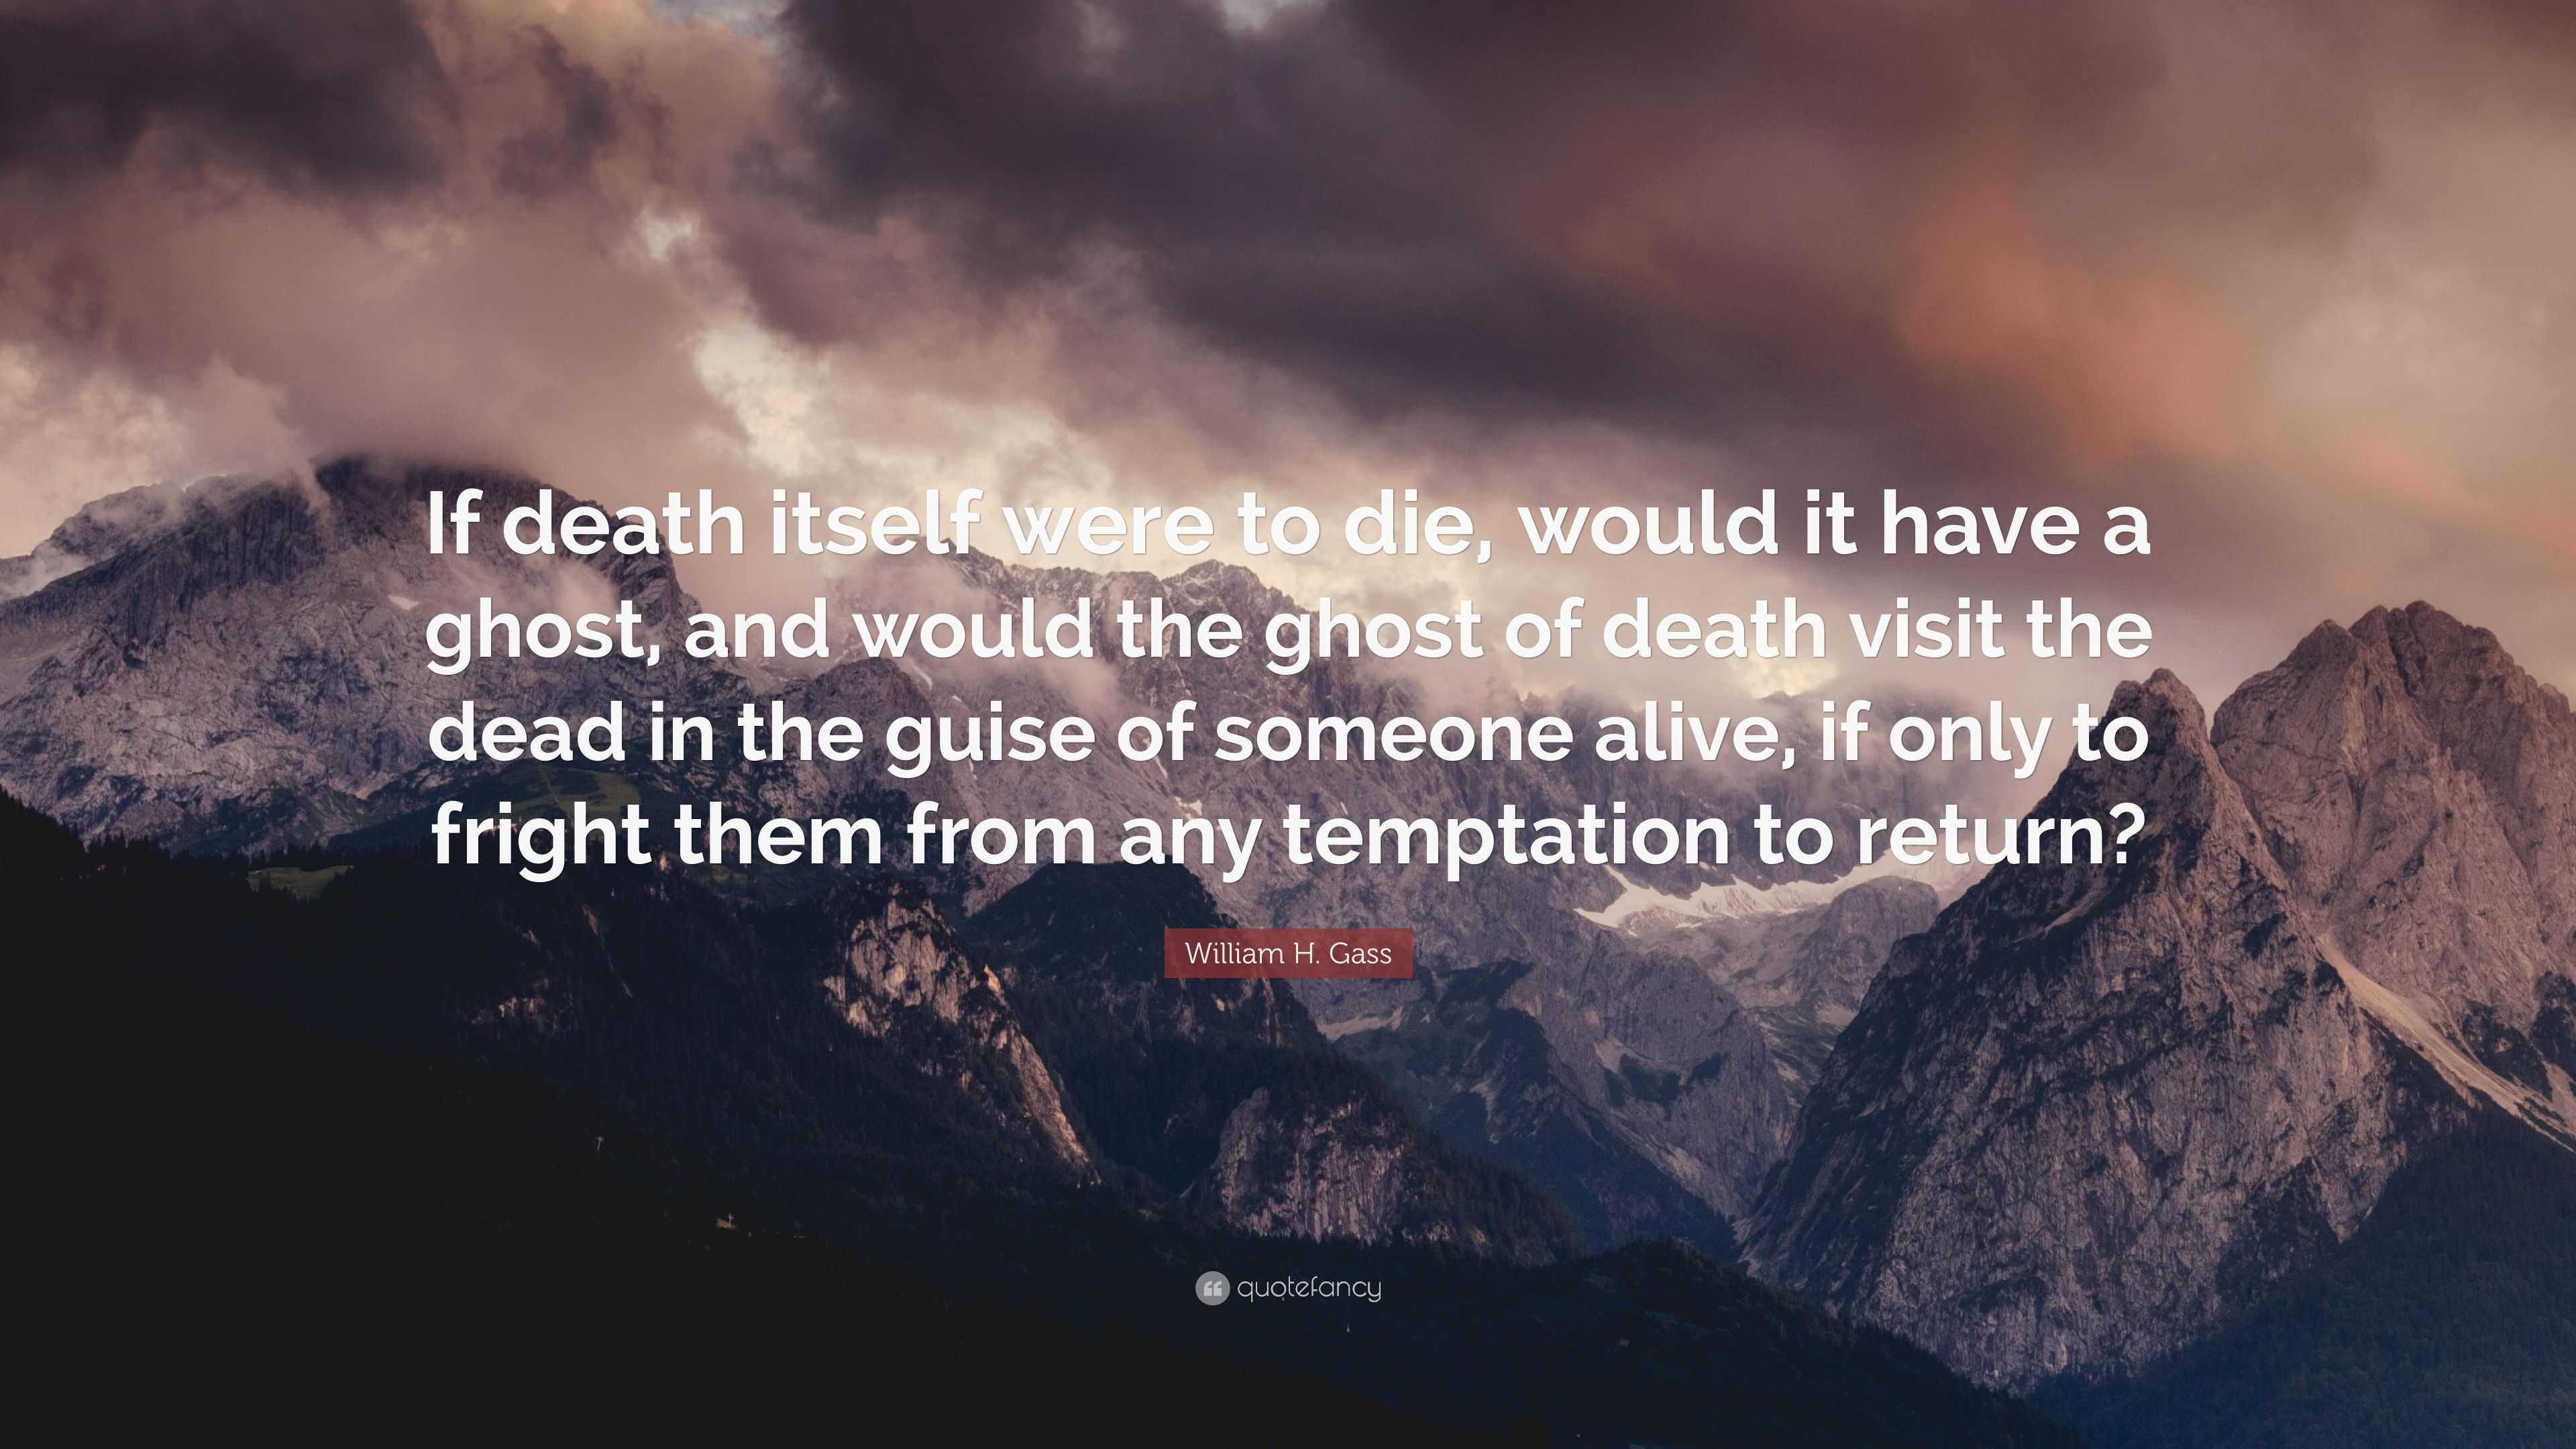 William H. Gass Quote: “If death itself were to die, would it have a ...